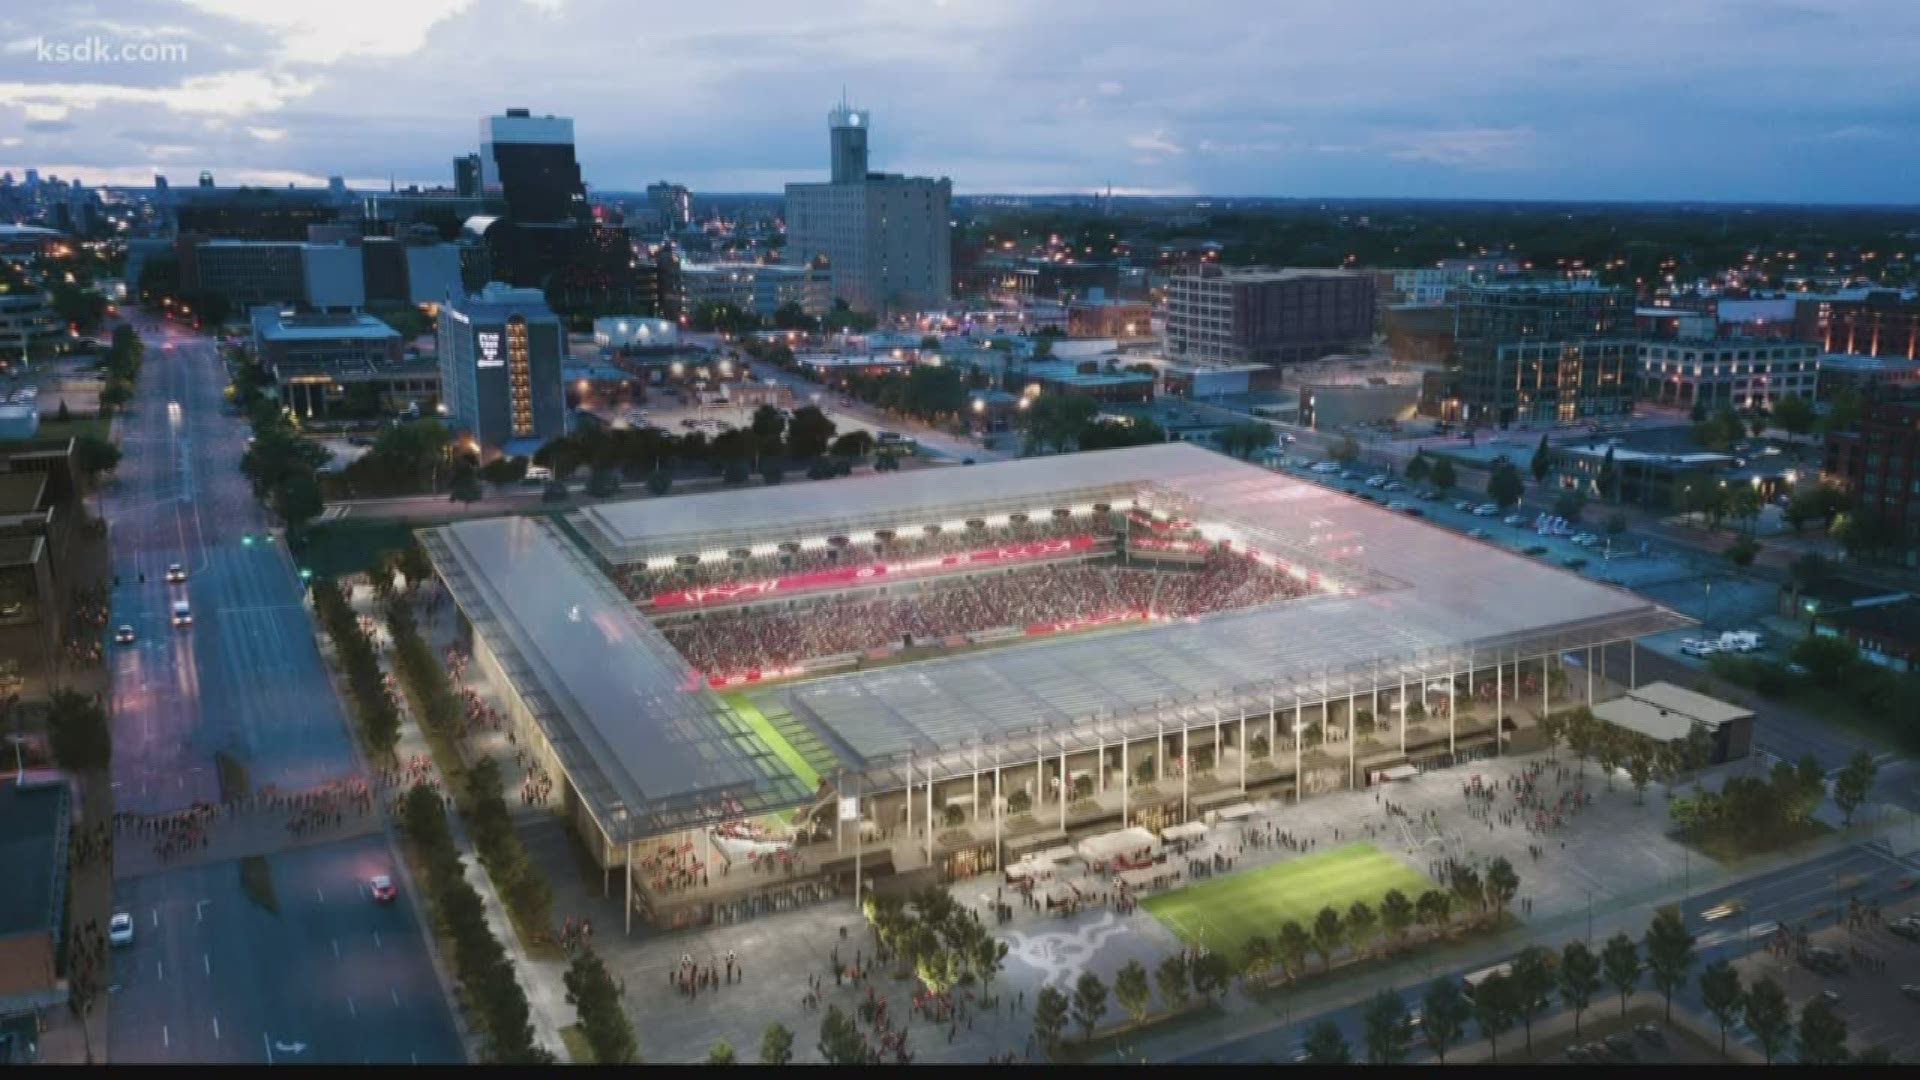 5 On Your Side's Frank Cusumano obtained new renderings of the MLS Stadium on Wednesday.